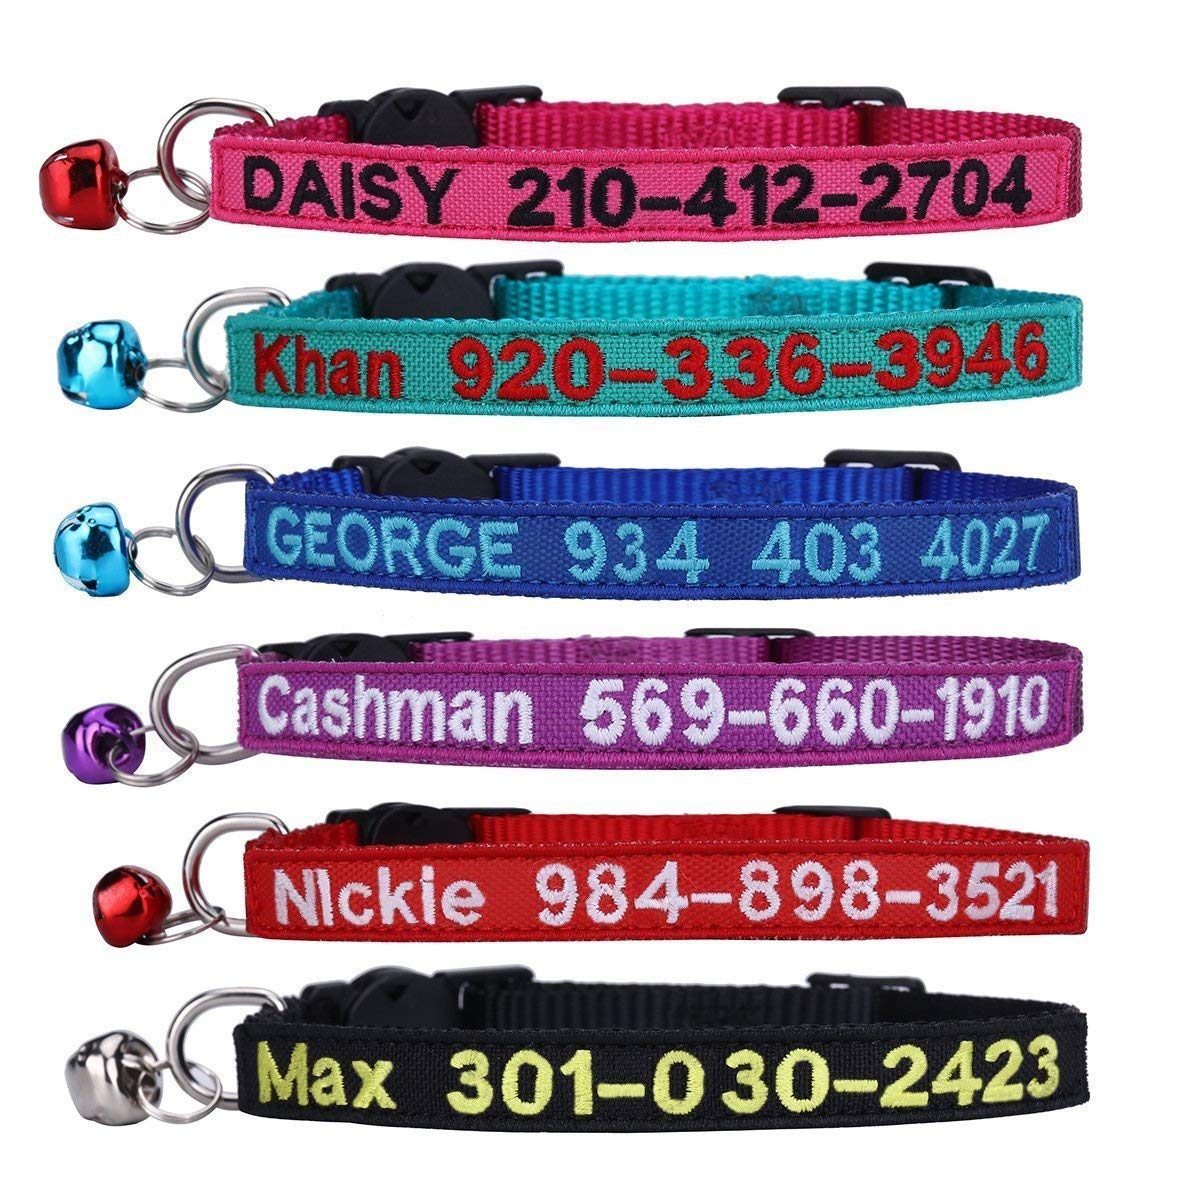 Personalized Embroidered Nylon Cat Collar